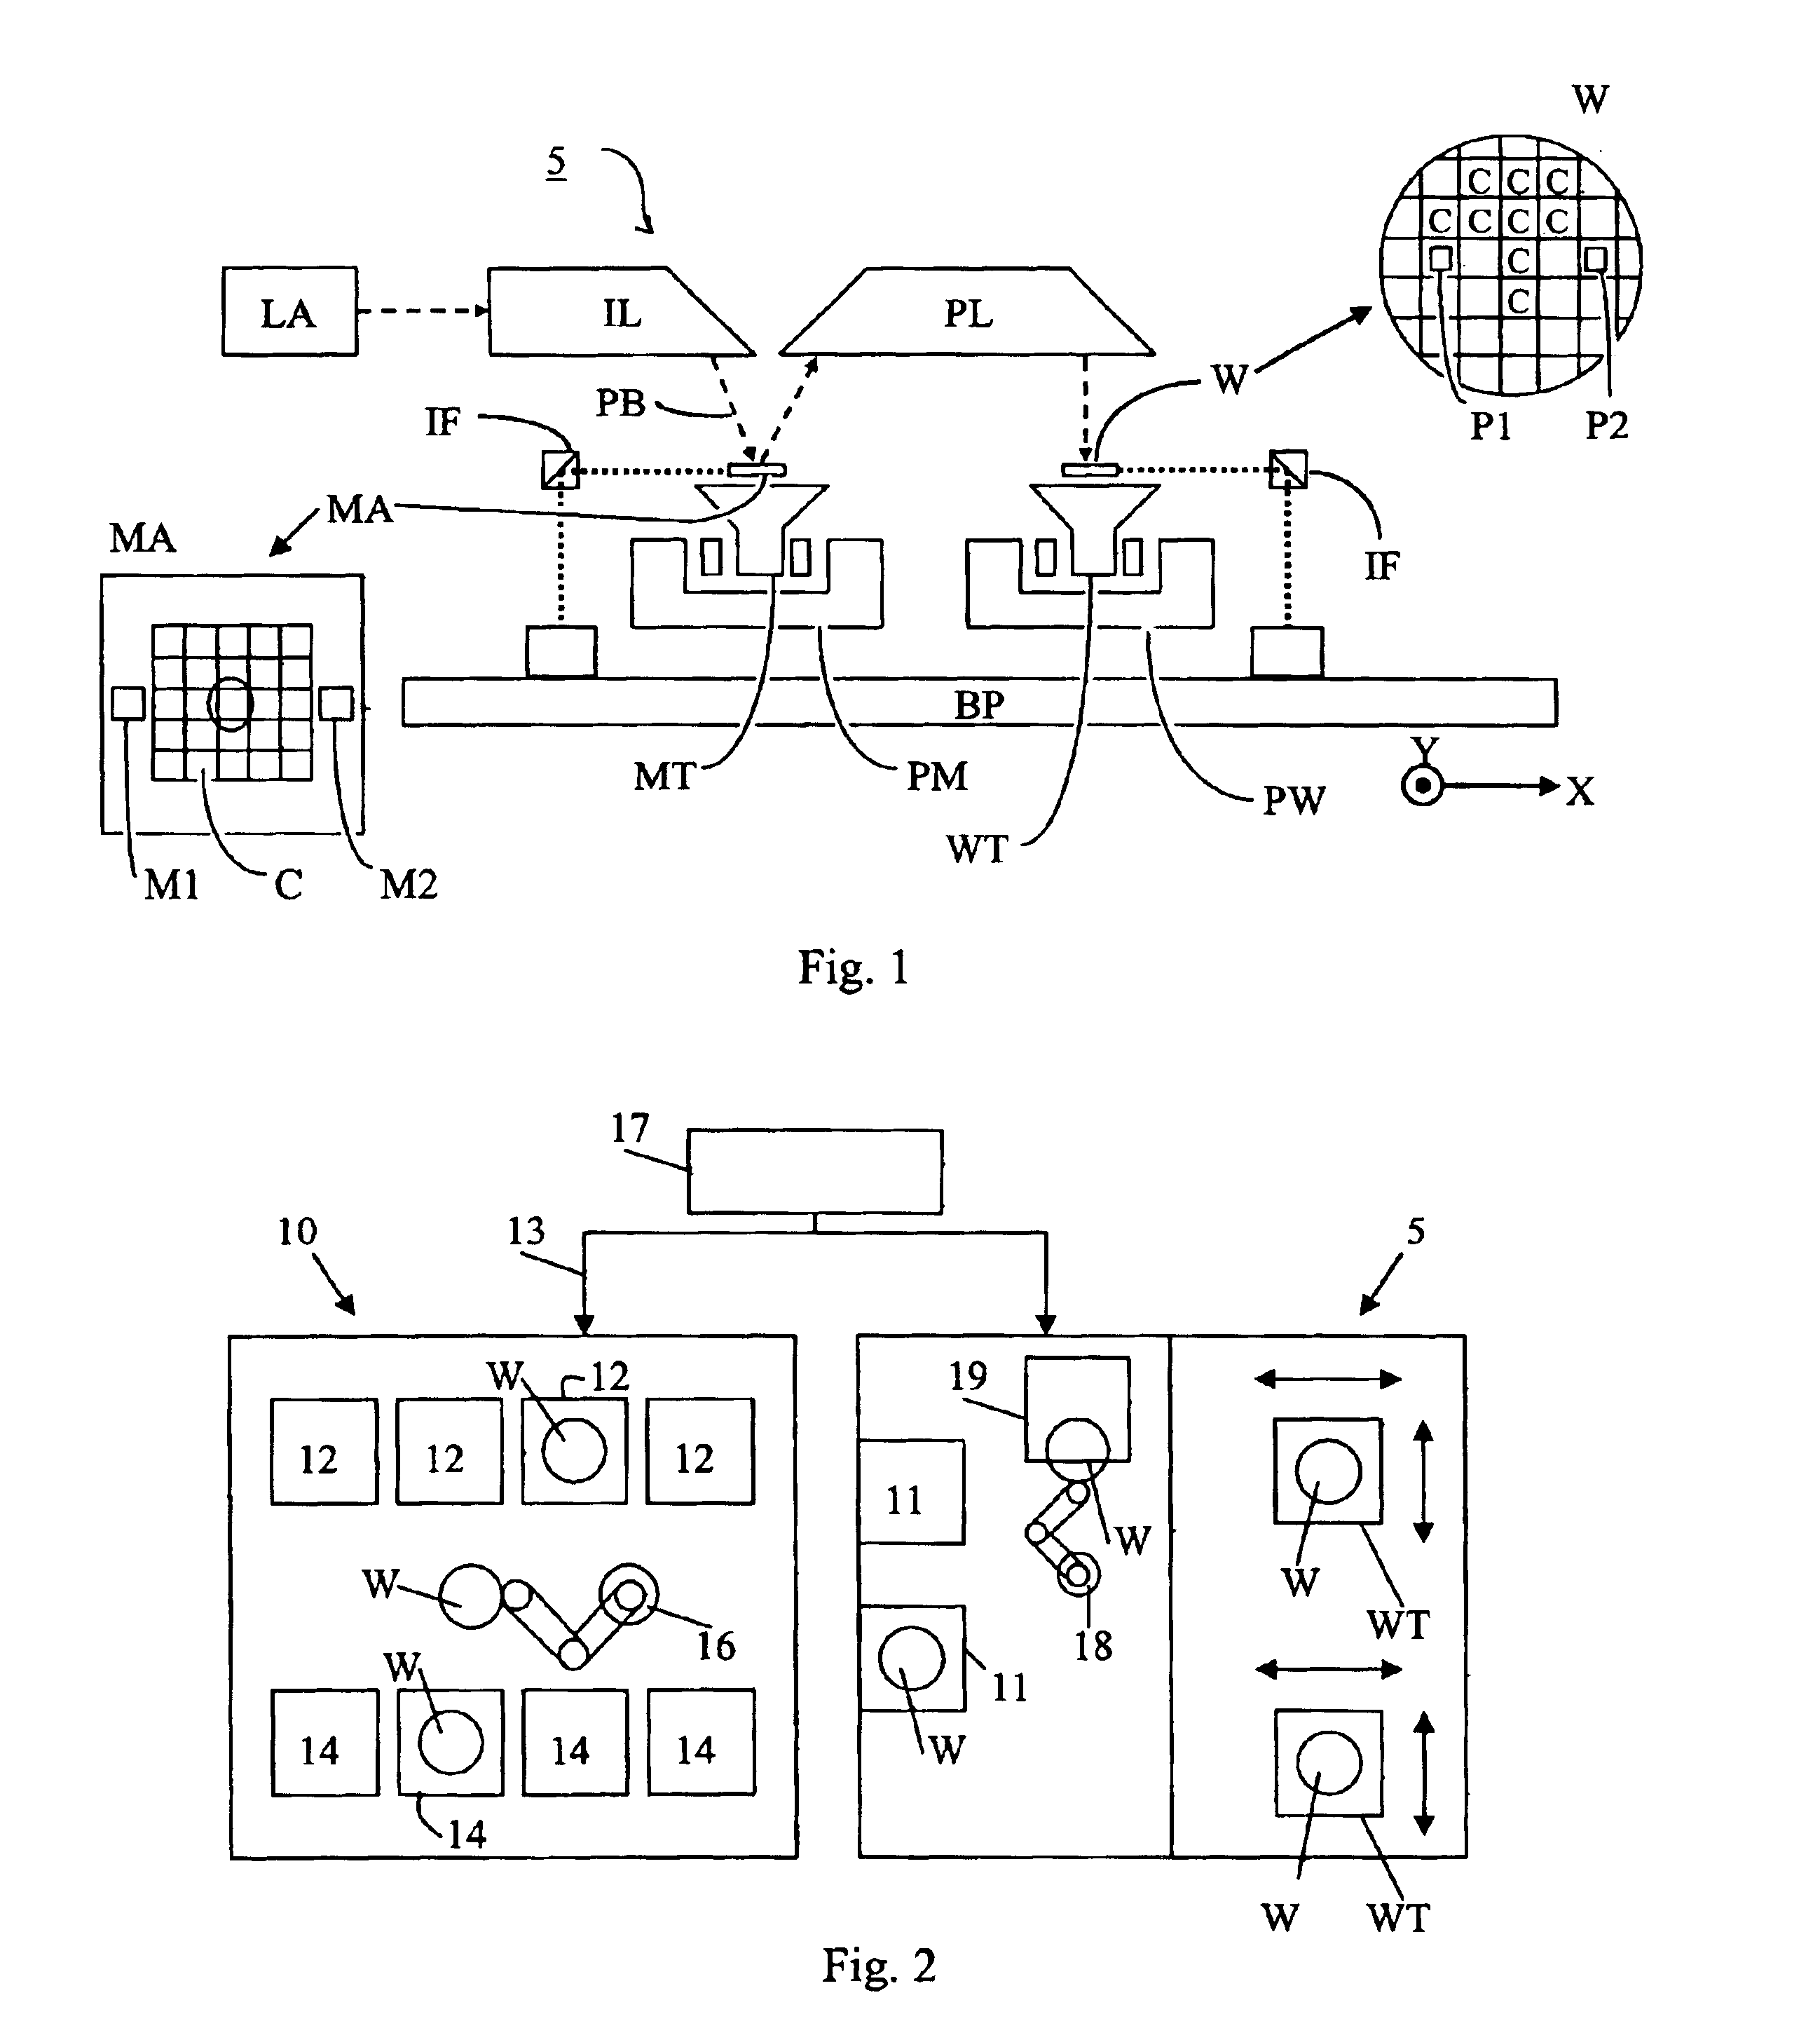 Method, computer program product and apparatus for scheduling maintenance actions in a substrate processing system